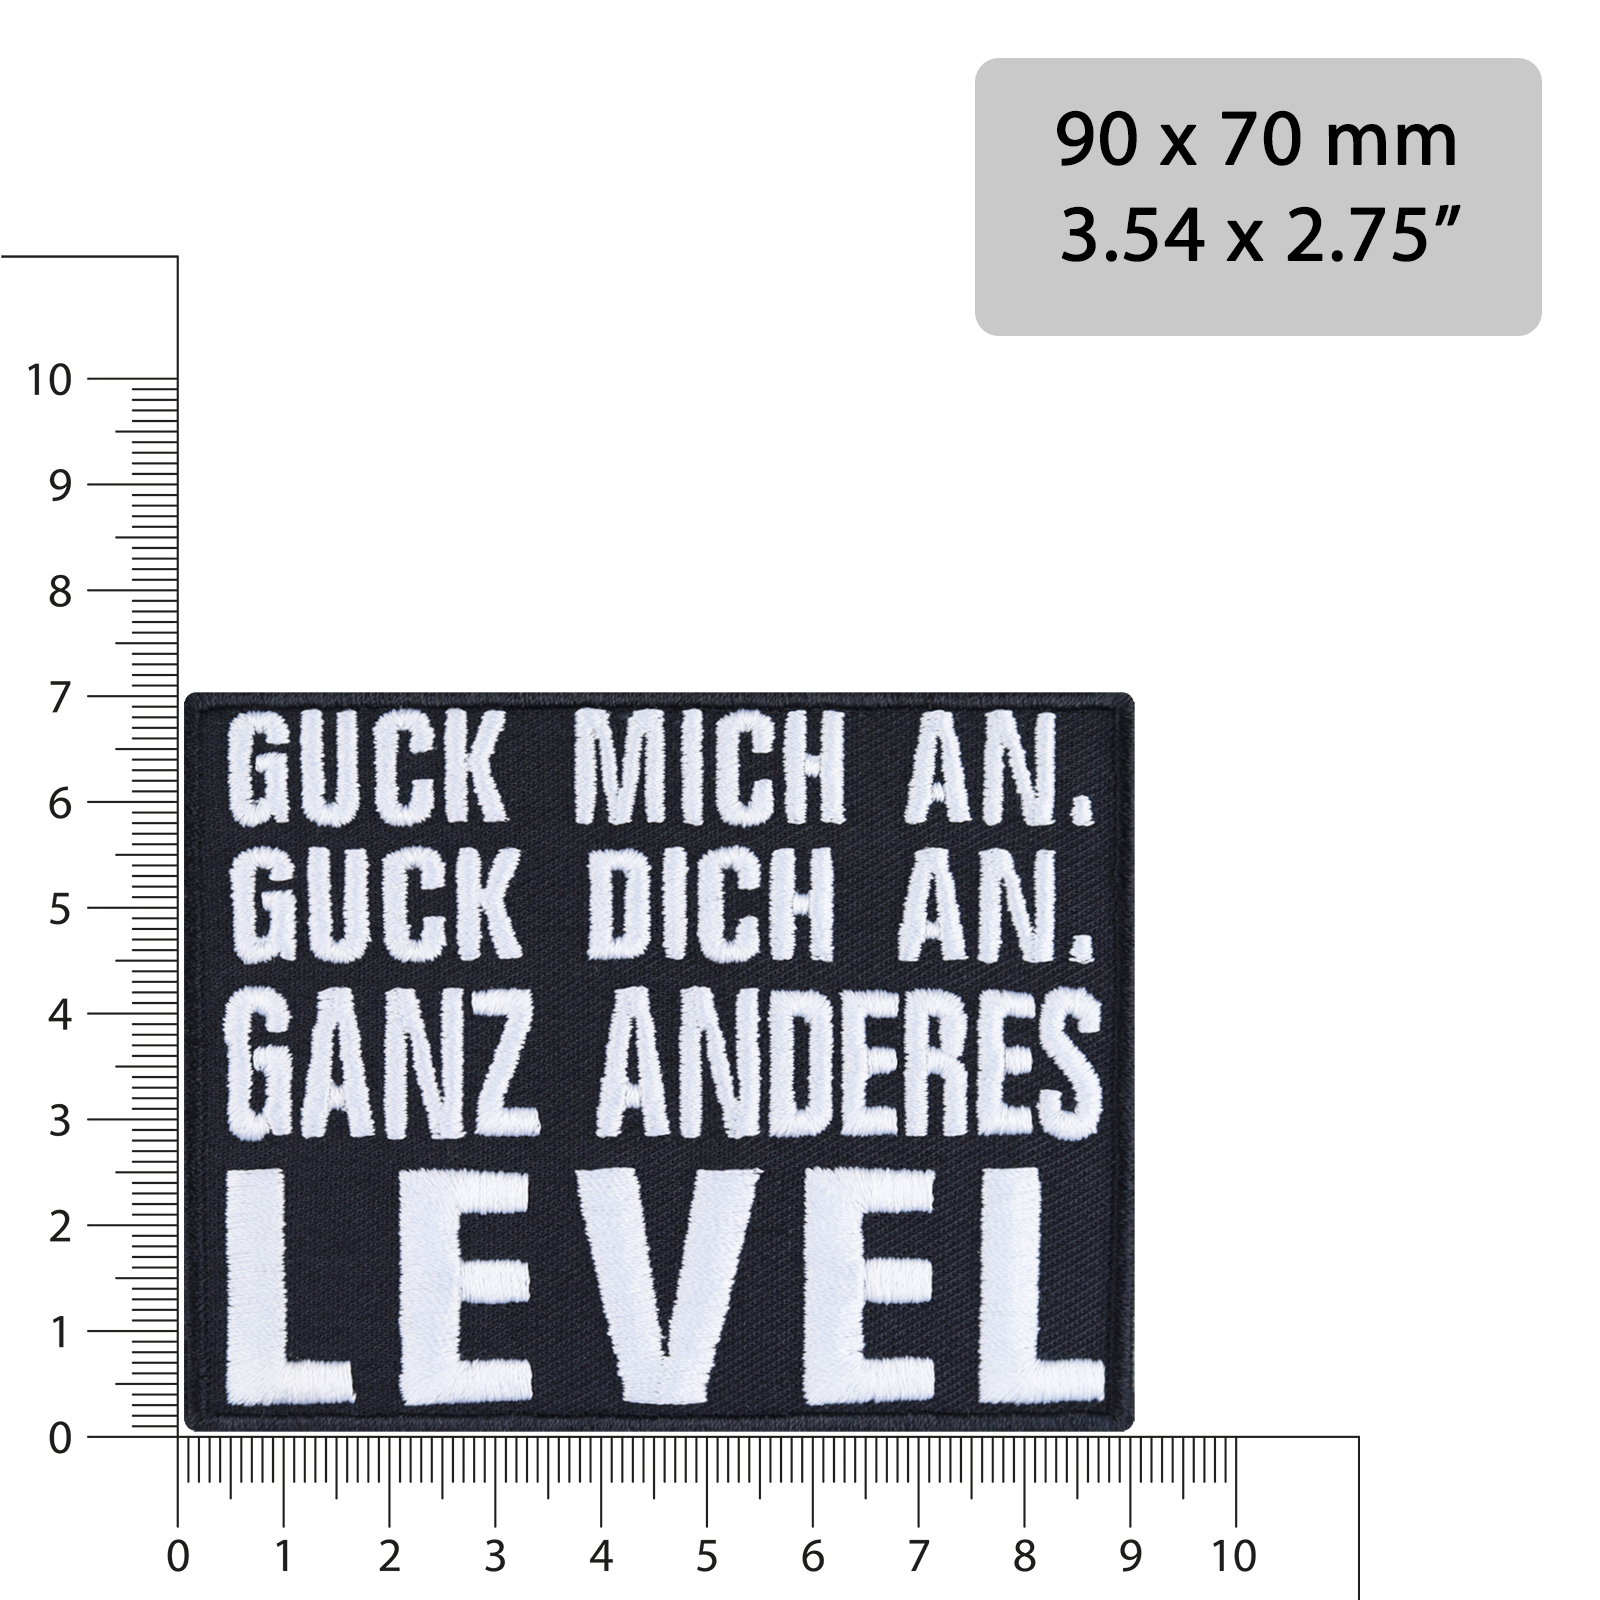 Guck mich an, guck dich an, ganz anderes Level - Patch